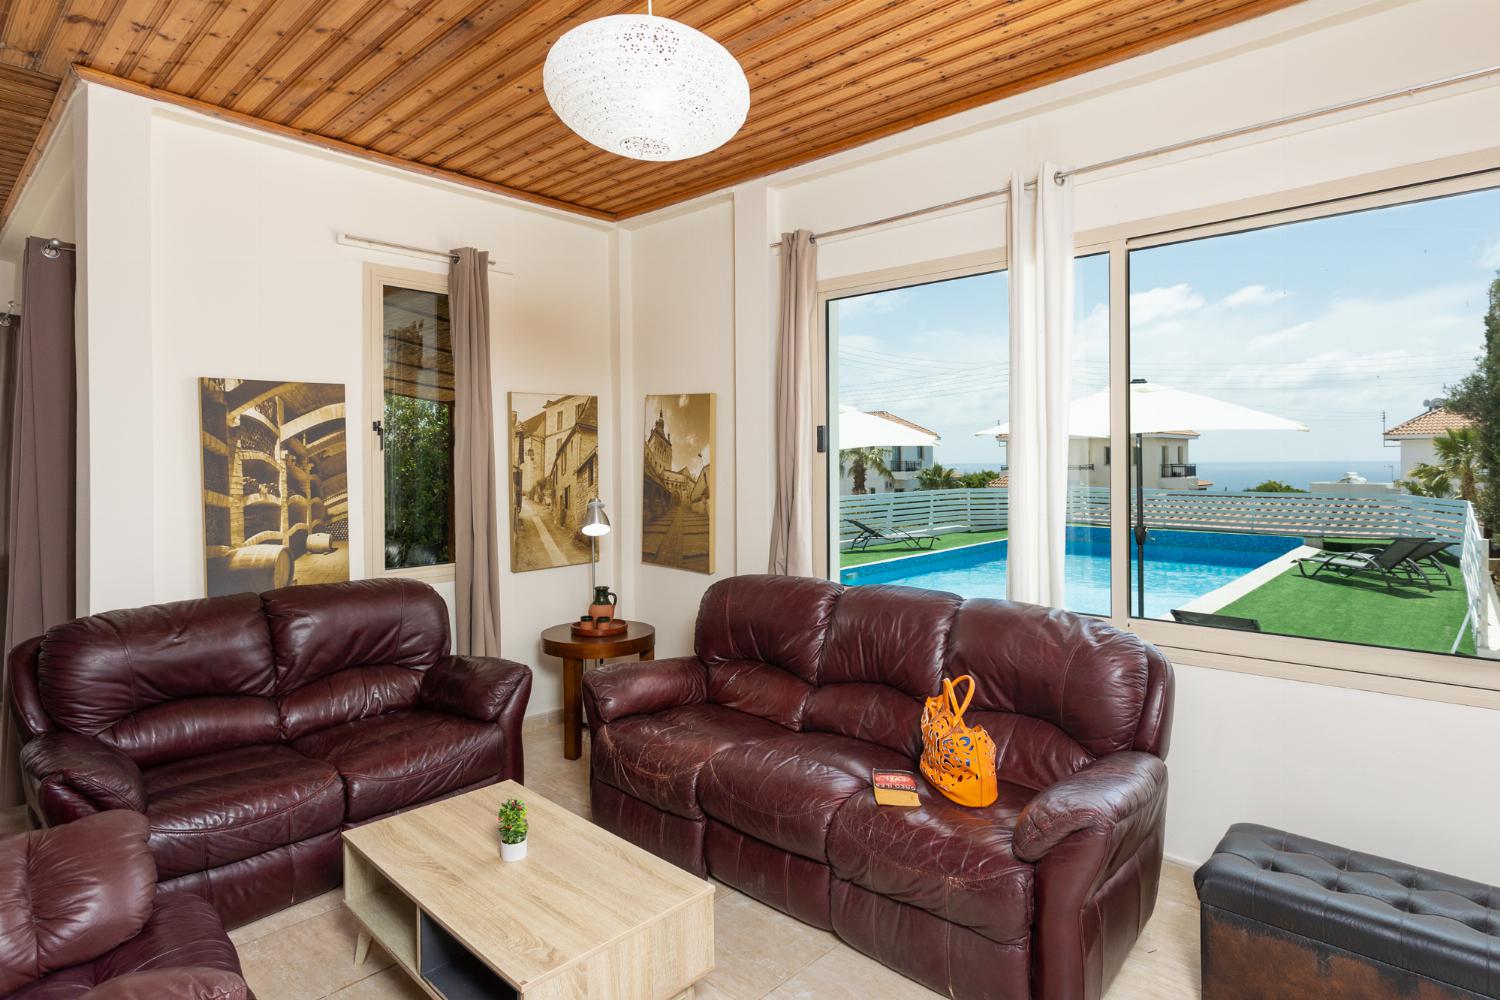 Open-plan living room with sofas, dining area, kitchen, WiFi internet, satellite TV, and sea views